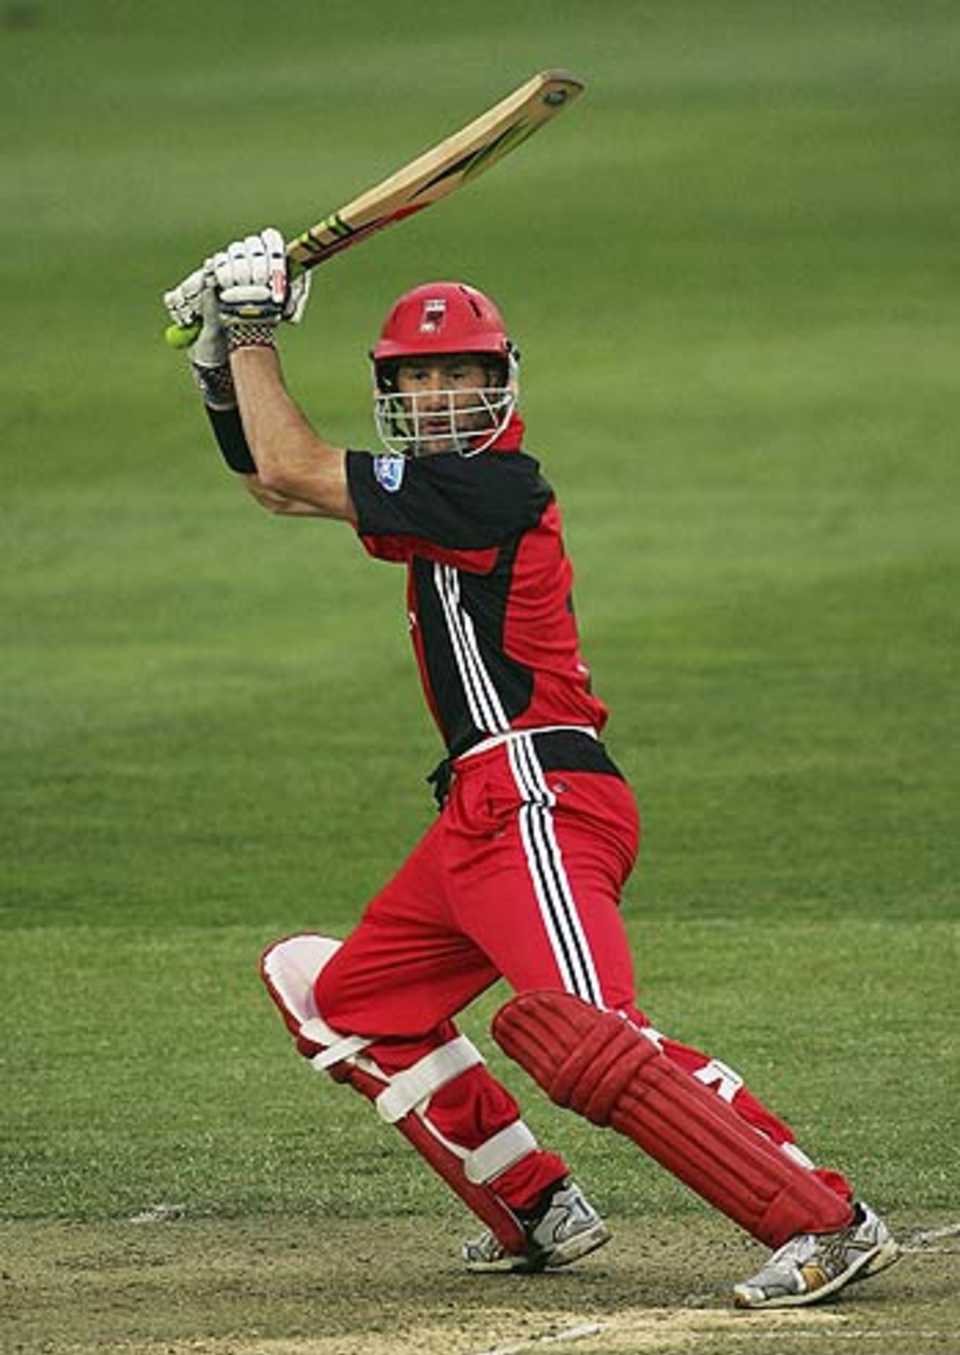 Matthew Elliott on his way to a match-winning 111 of 112 balls against New South Wales